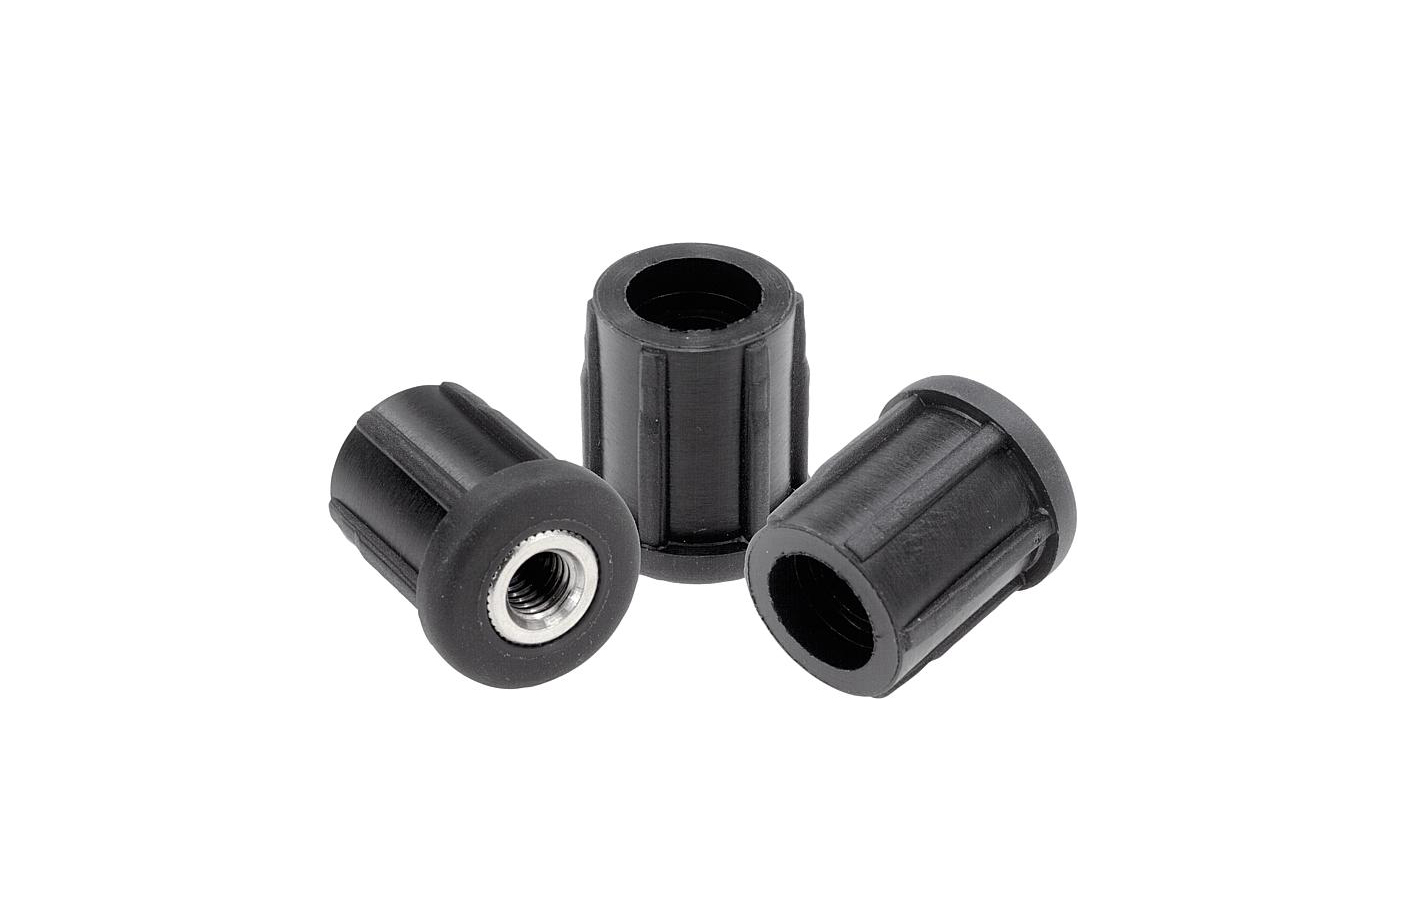 K0431 Tube inserts round with tapped bush